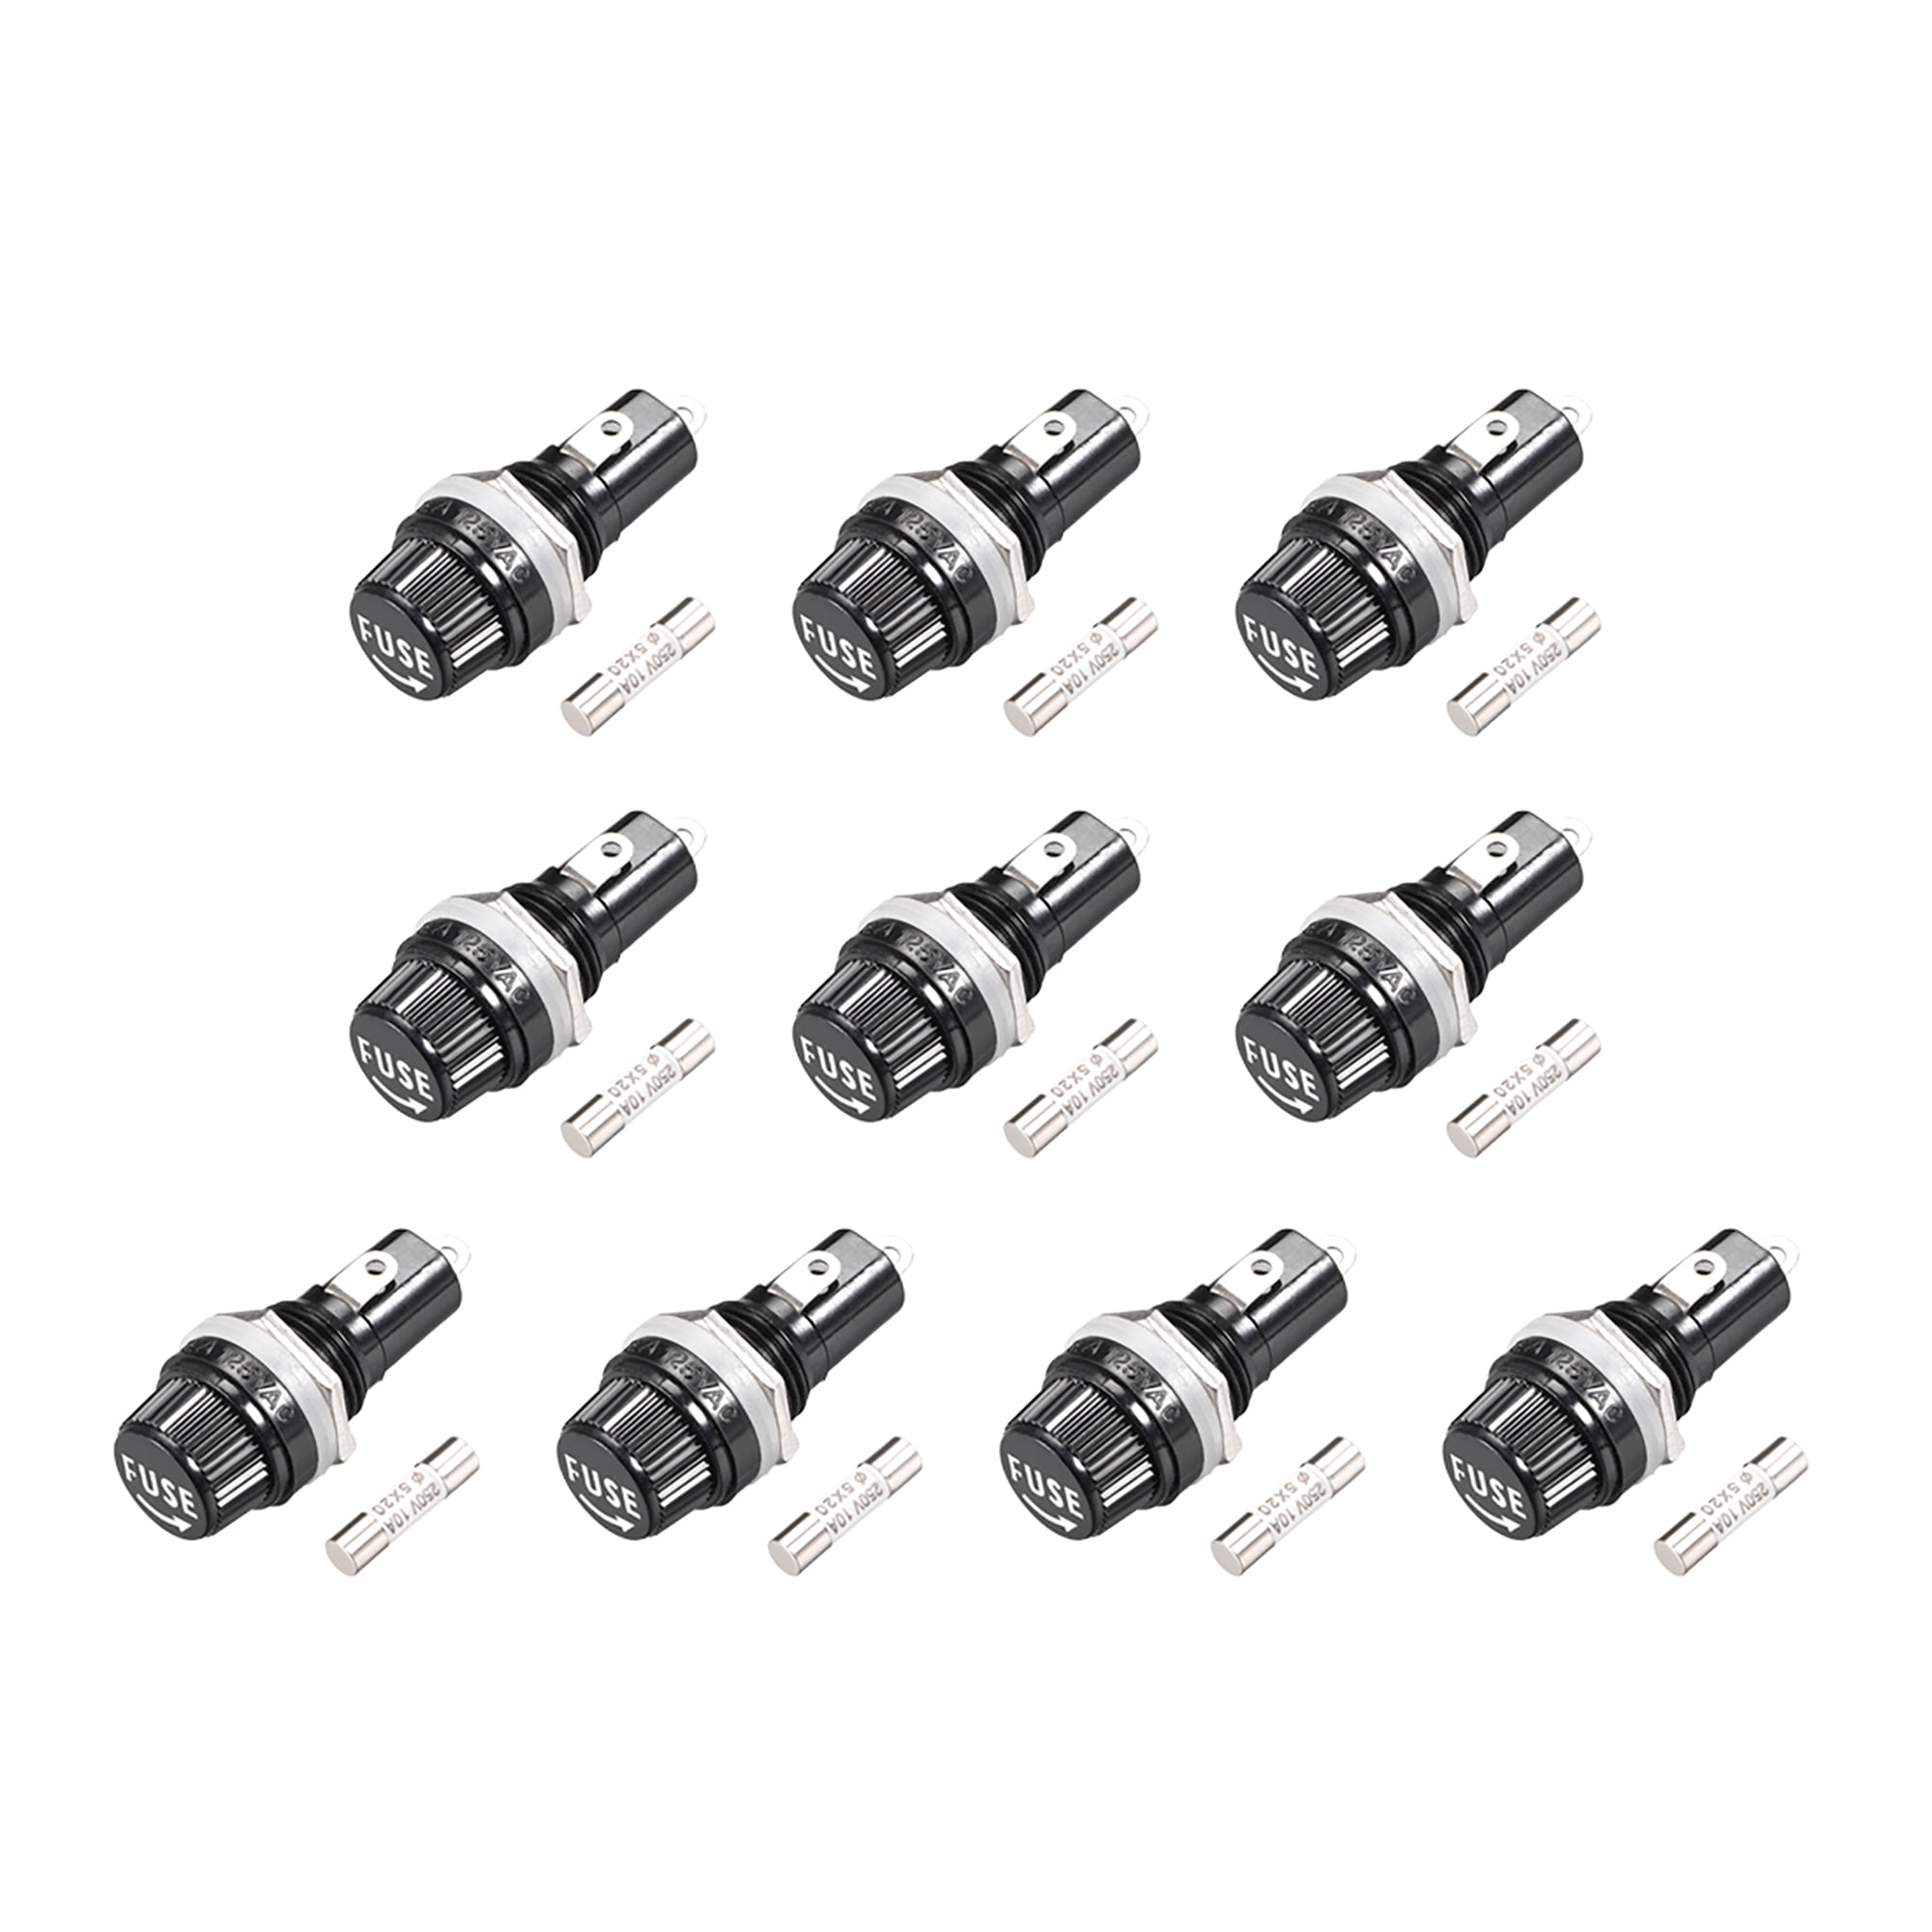 uxcell Screw Cap Panel Mounted Fuse Holder AC 125V/15A 250V/10A Black with 5 x 20mm Glass Fuse 10Set 